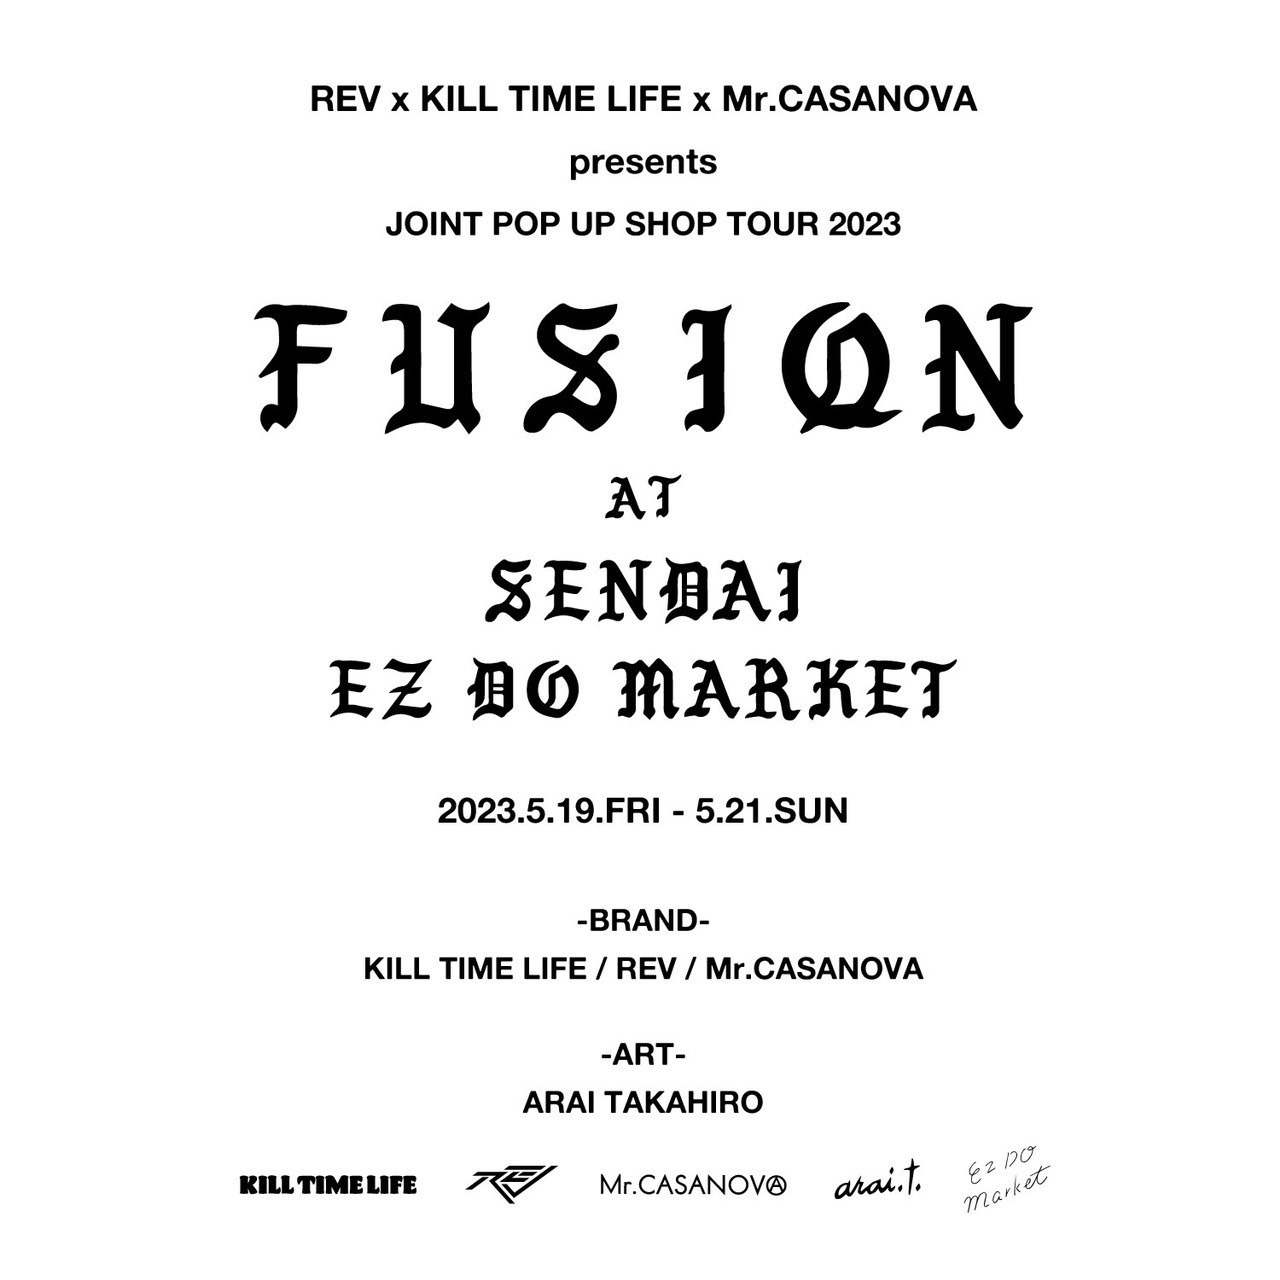 JOINT POP UP STORE EVENT "FUSION” at SENDAI